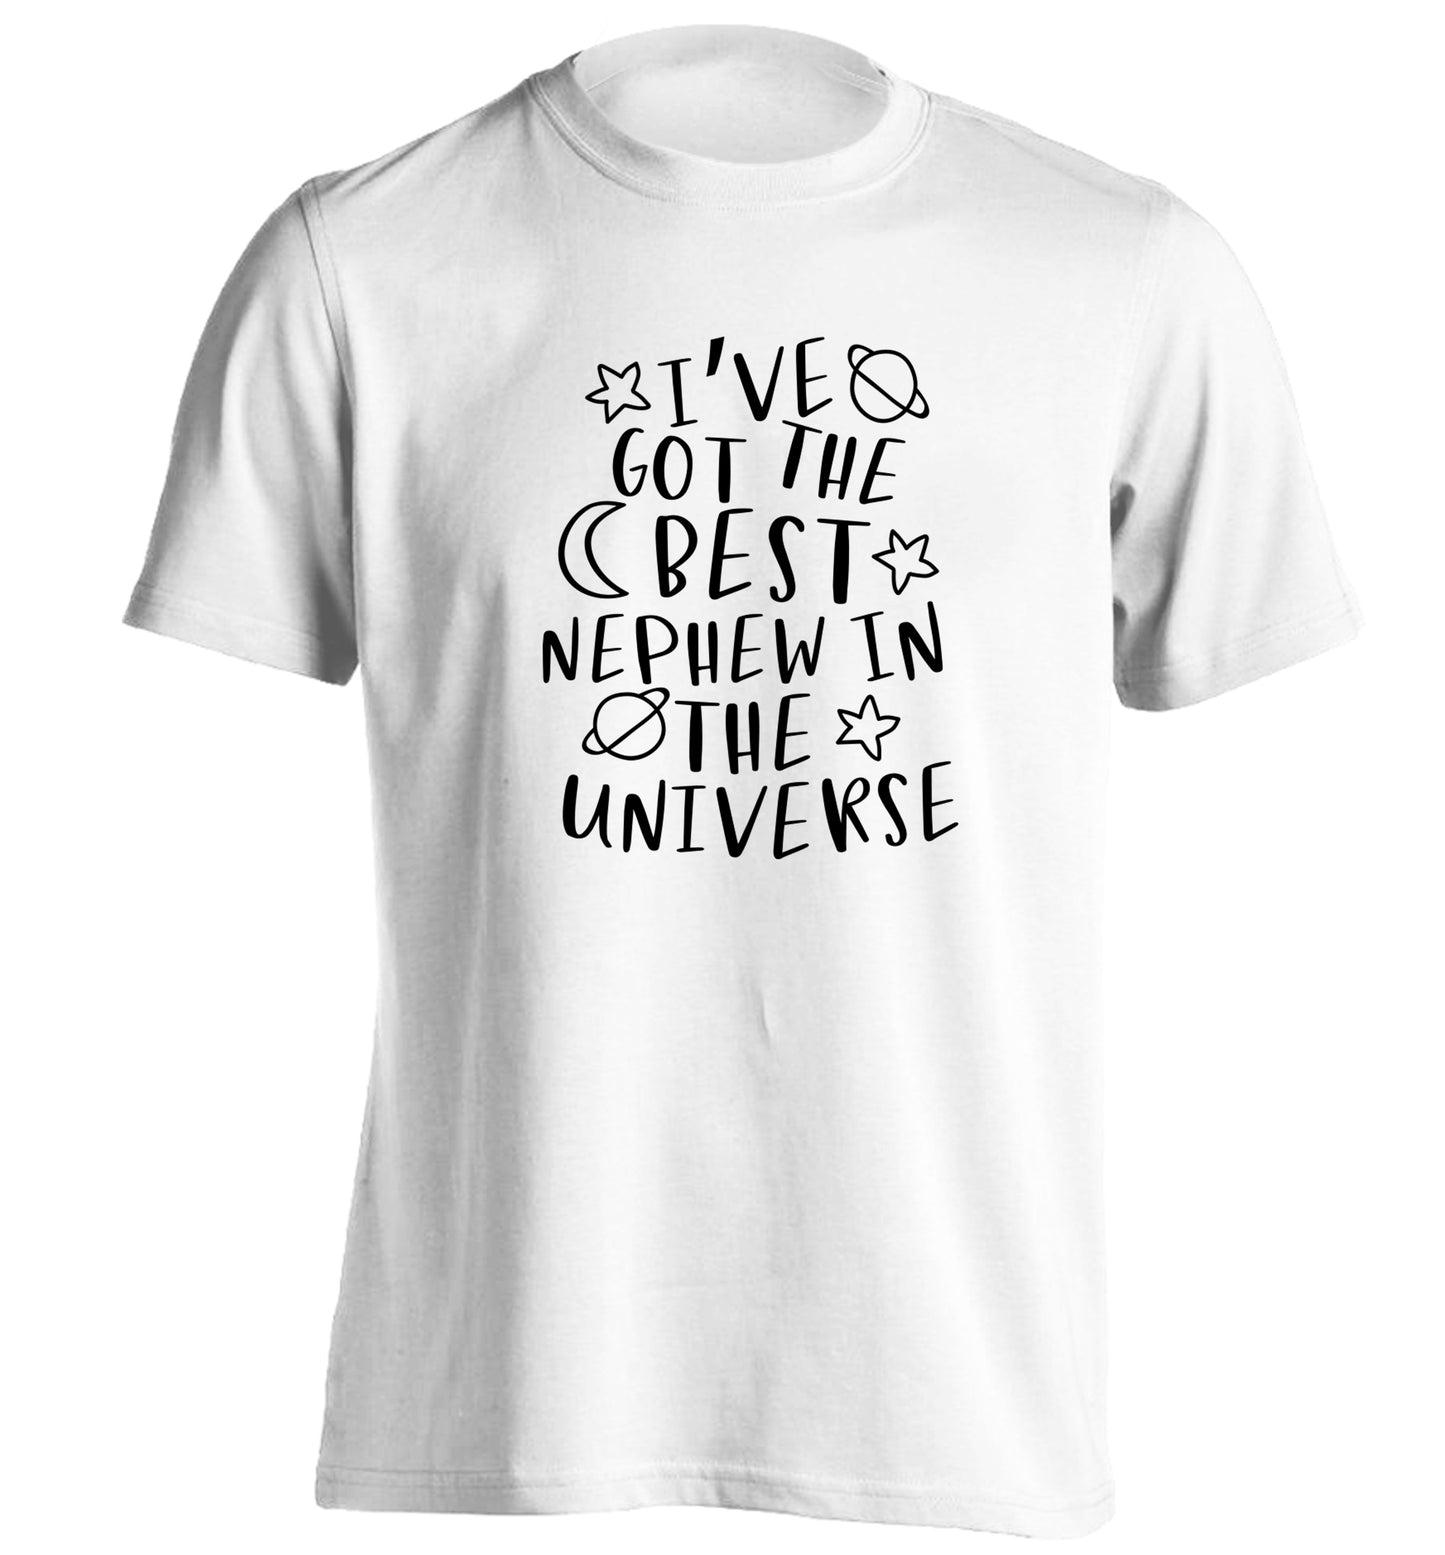 I've got the best nephew in the universe adults unisex white Tshirt 2XL